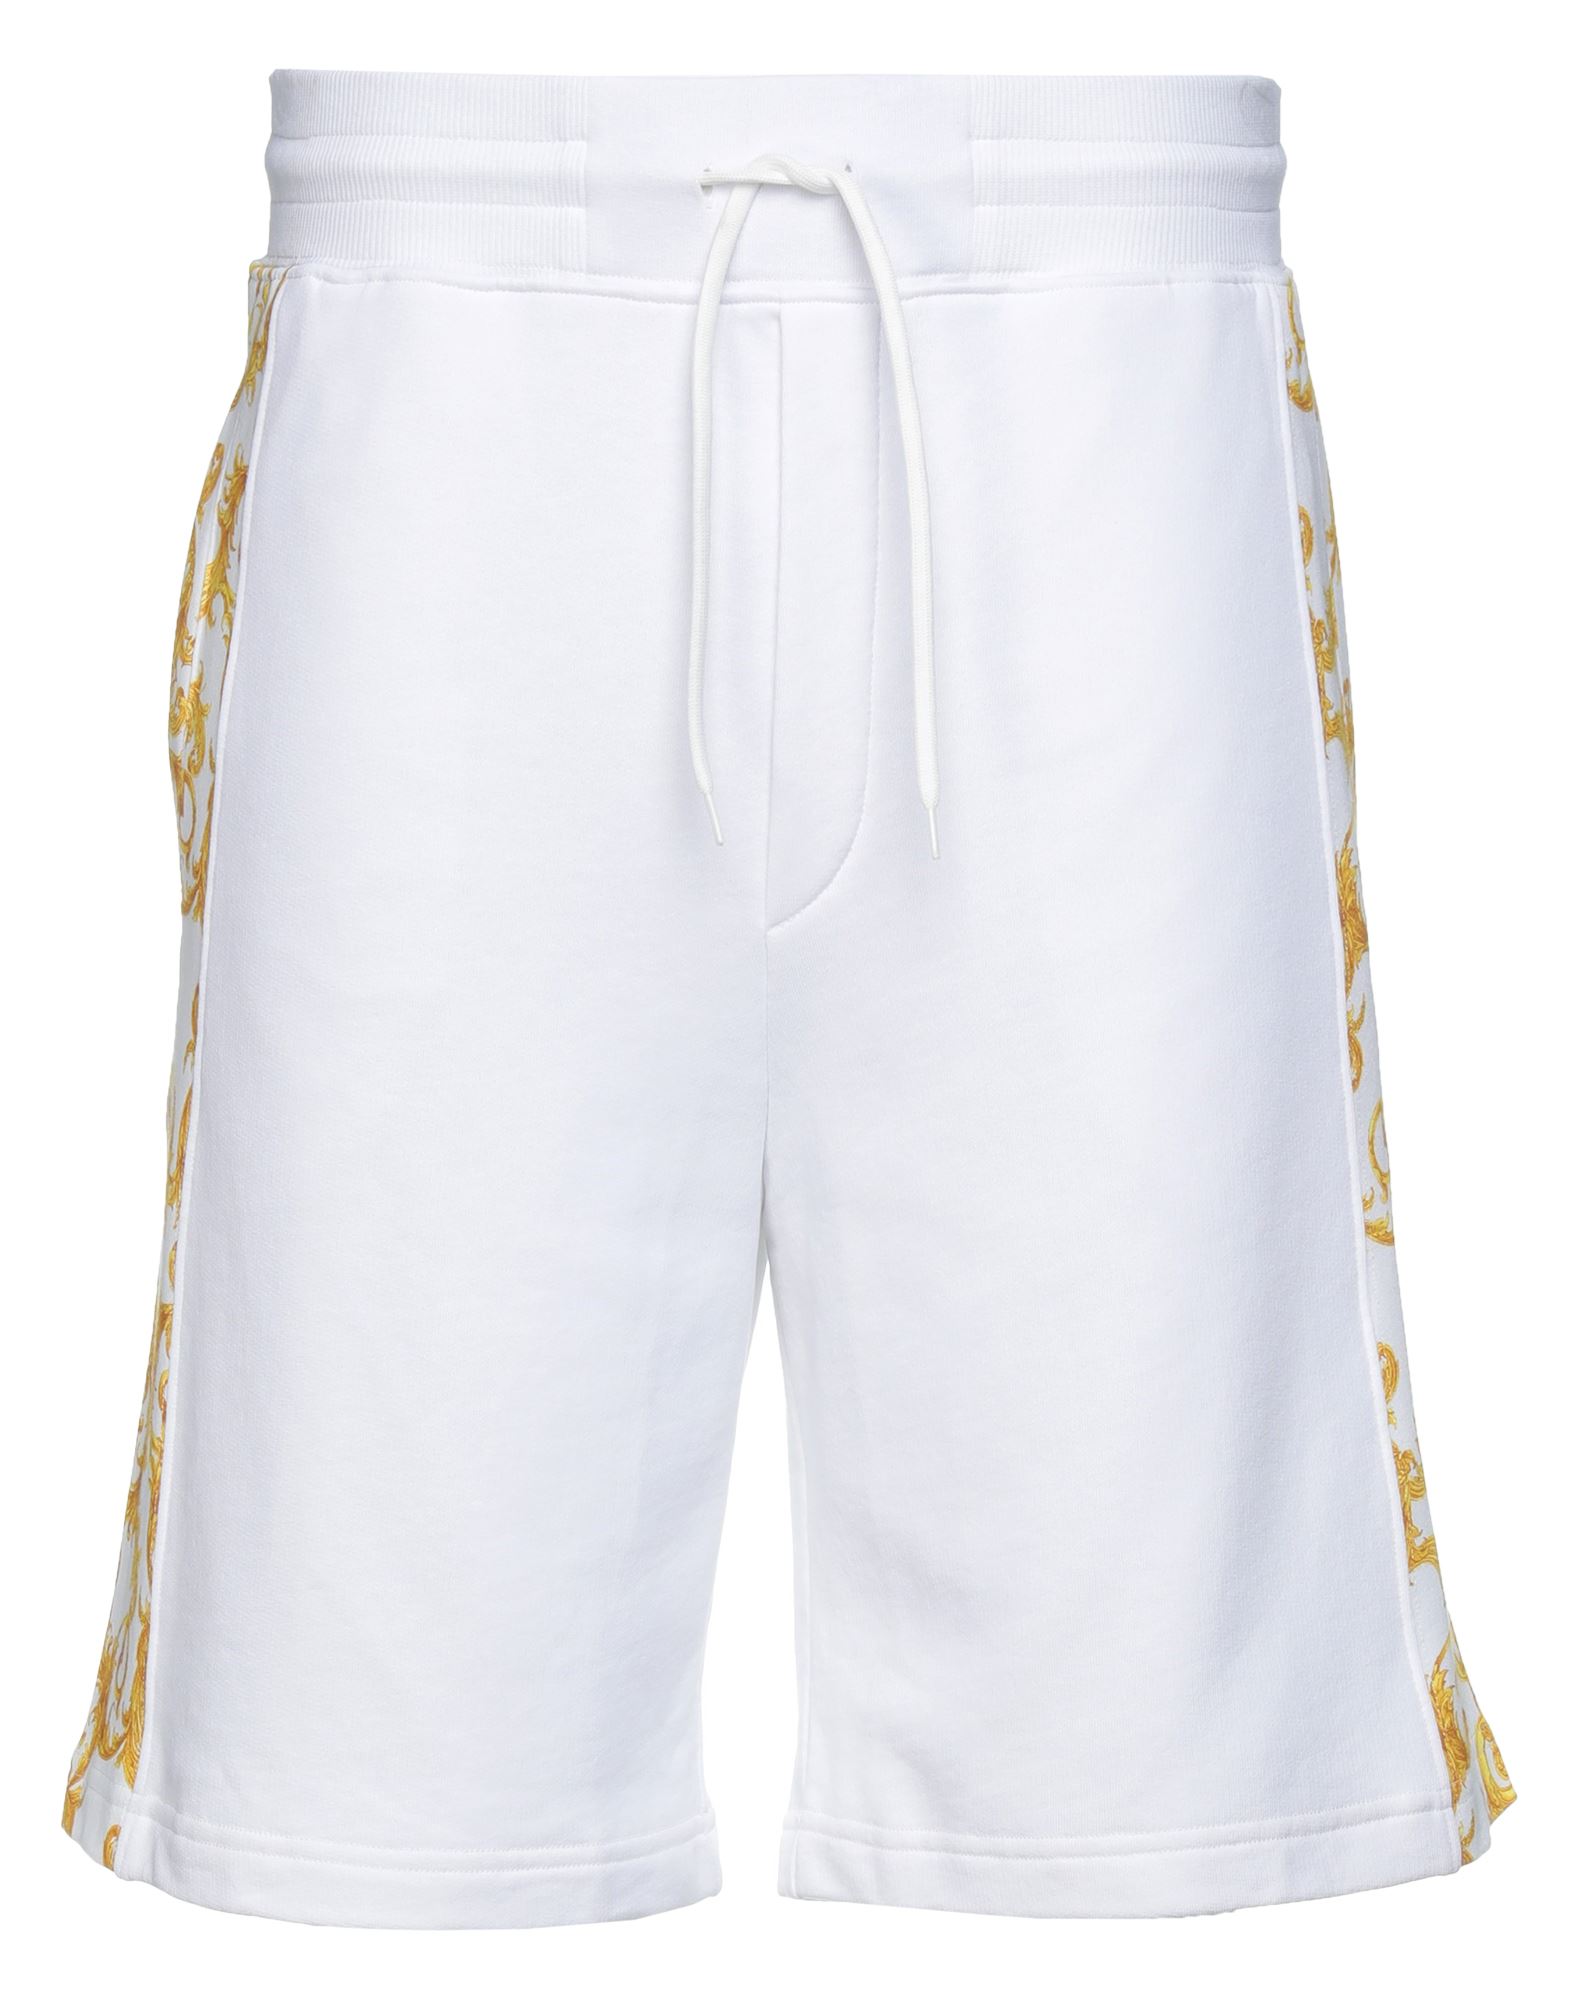 VERSACE JEANS COUTURE Shorts & Bermudashorts Herren Weiß von VERSACE JEANS COUTURE